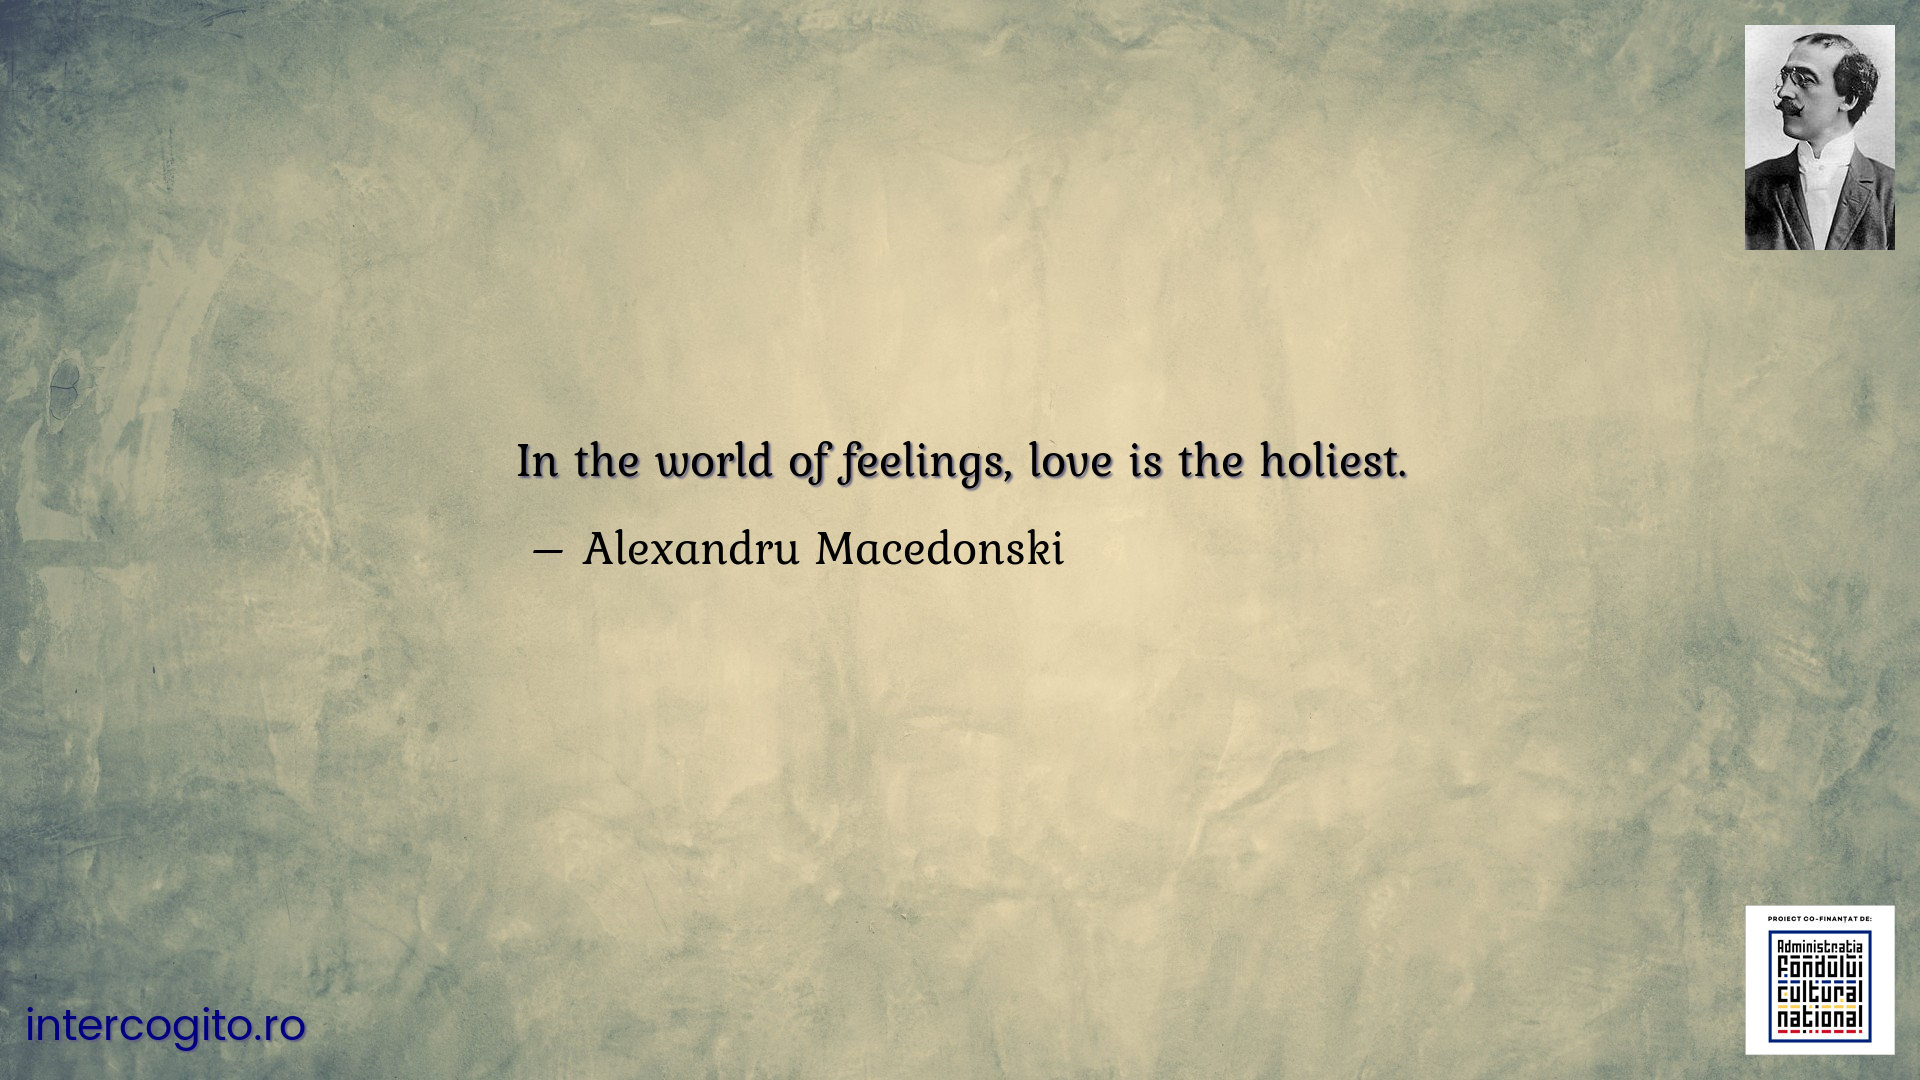 In the world of feelings, love is the holiest.